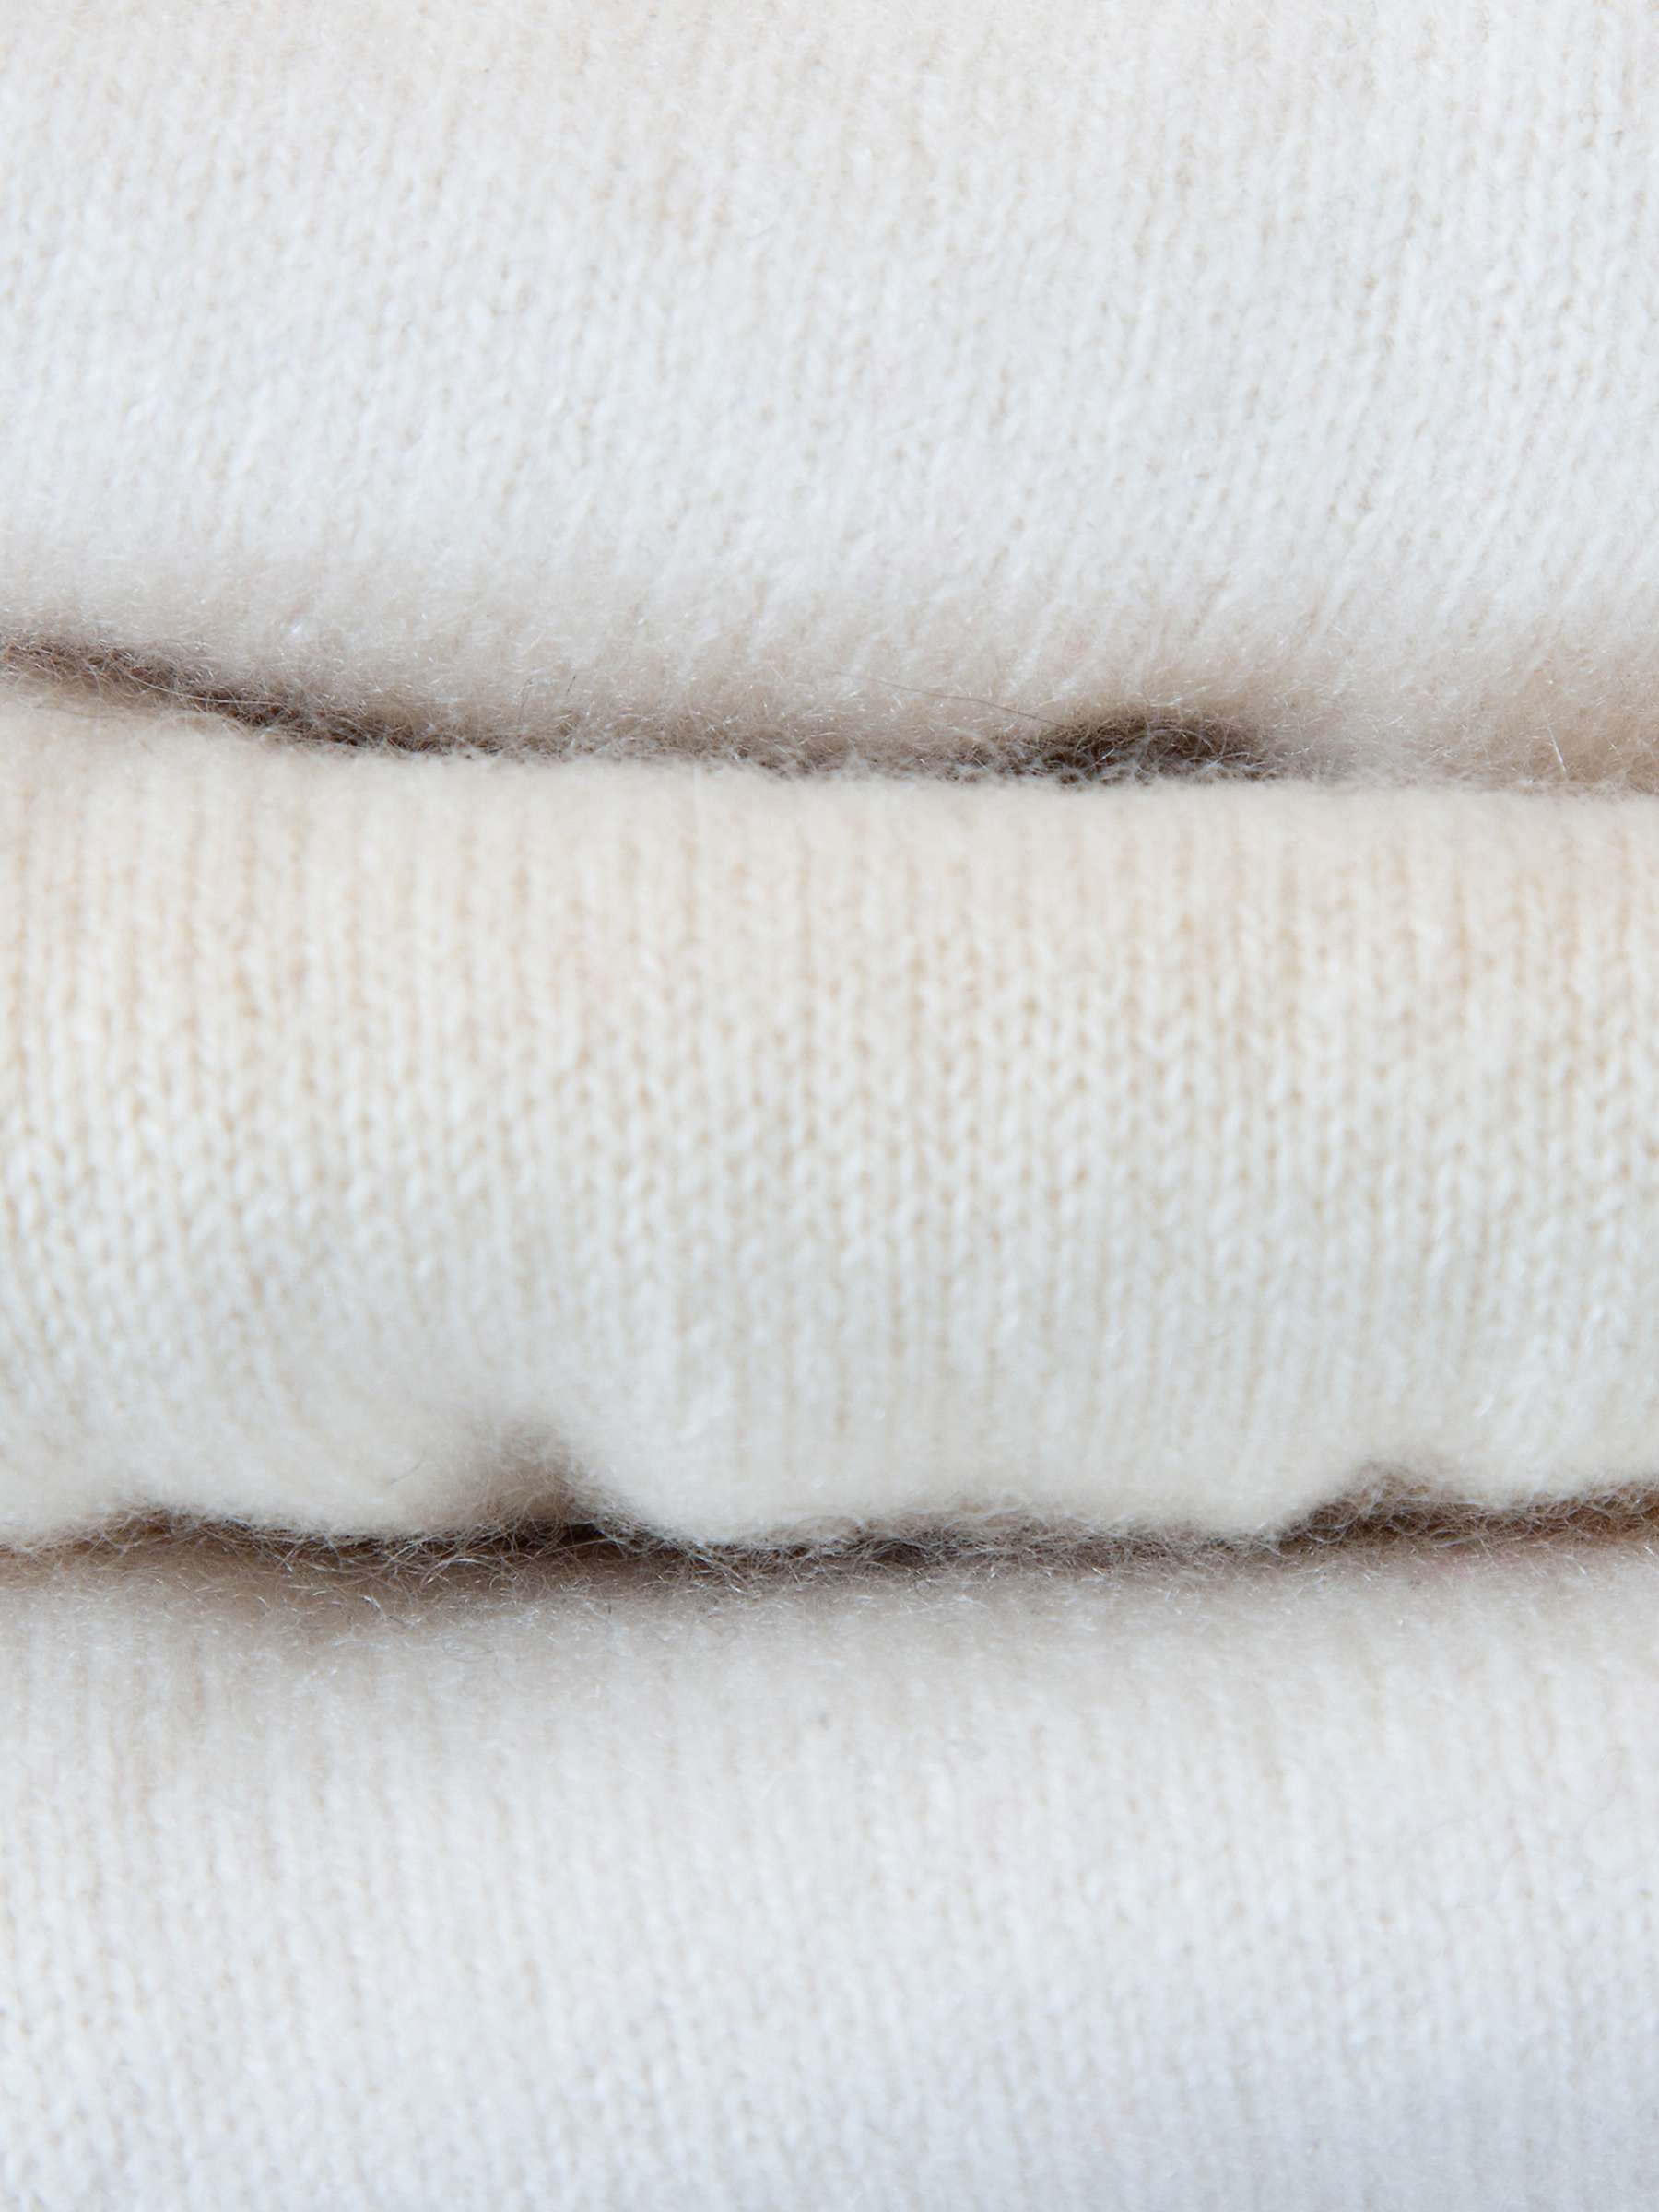 Celtic & Co. x Turtle Doves Recycled Cashmere Fingerless Gloves, Cream ...